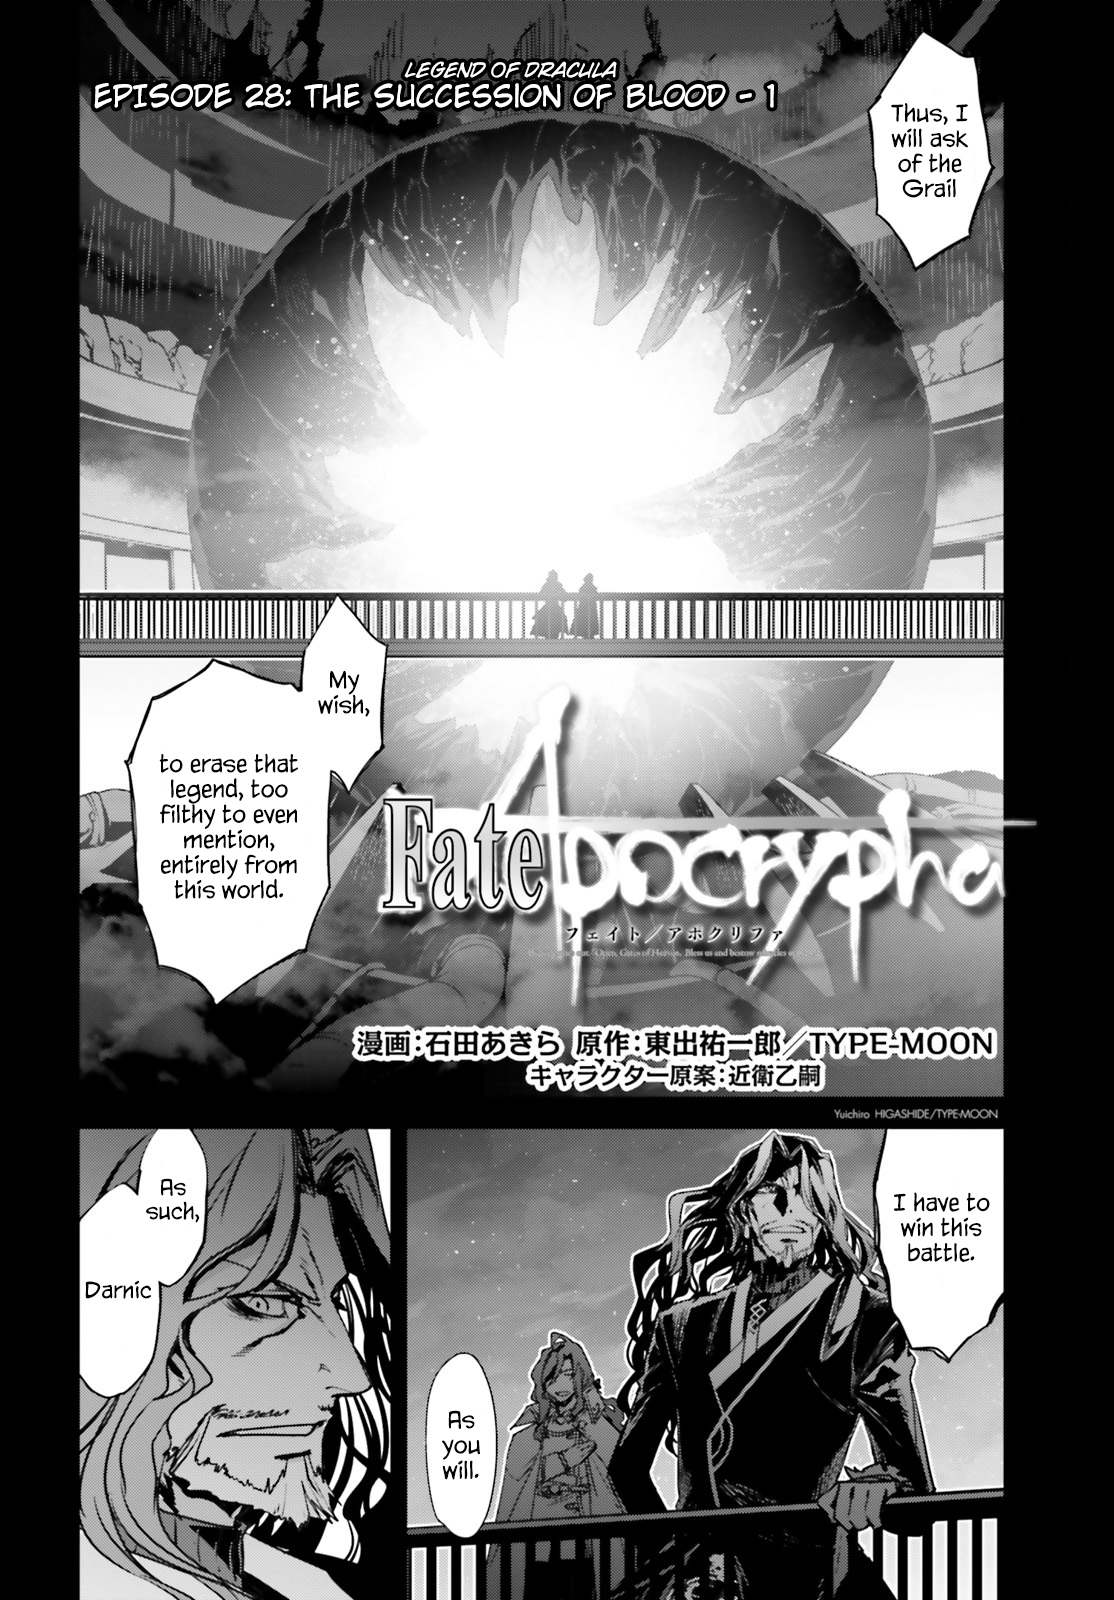 Fate/apocrypha Vol.7 Chapter 28: Episode: 28 Legend Of Dracula 1 - Picture 2